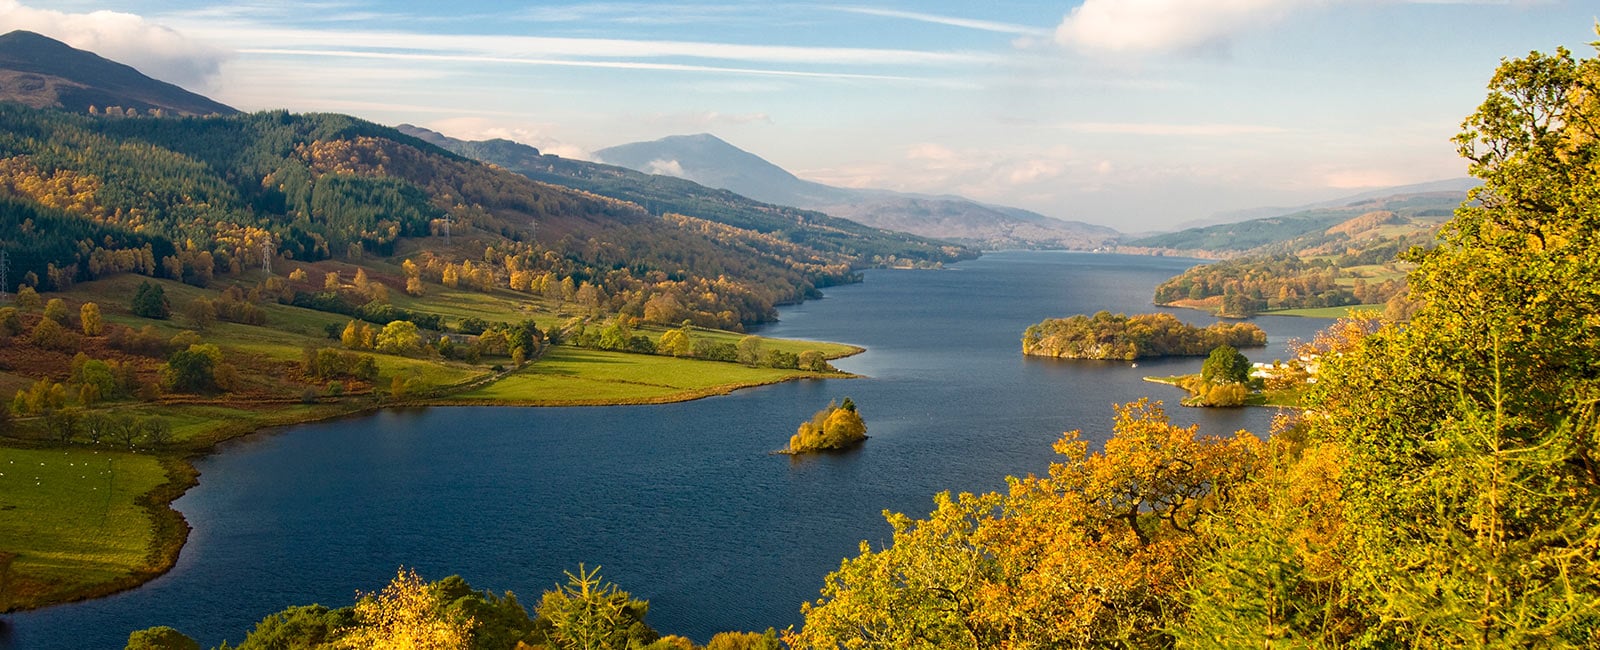 Enjoy the natural beauty of Scotland with Hilton Grand Vacations